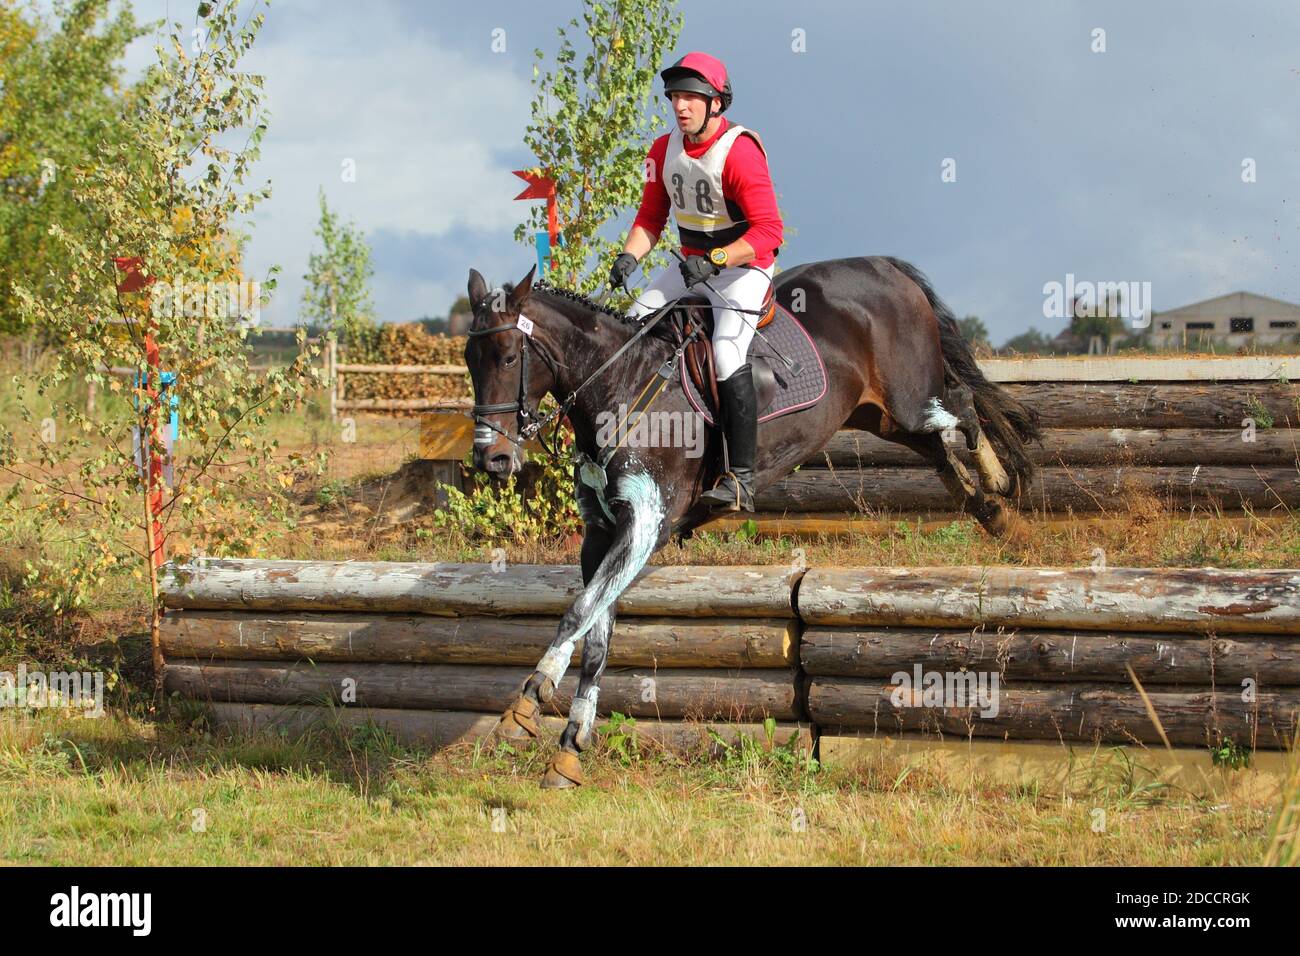 Horse and rider jumping cross country Stock Photo